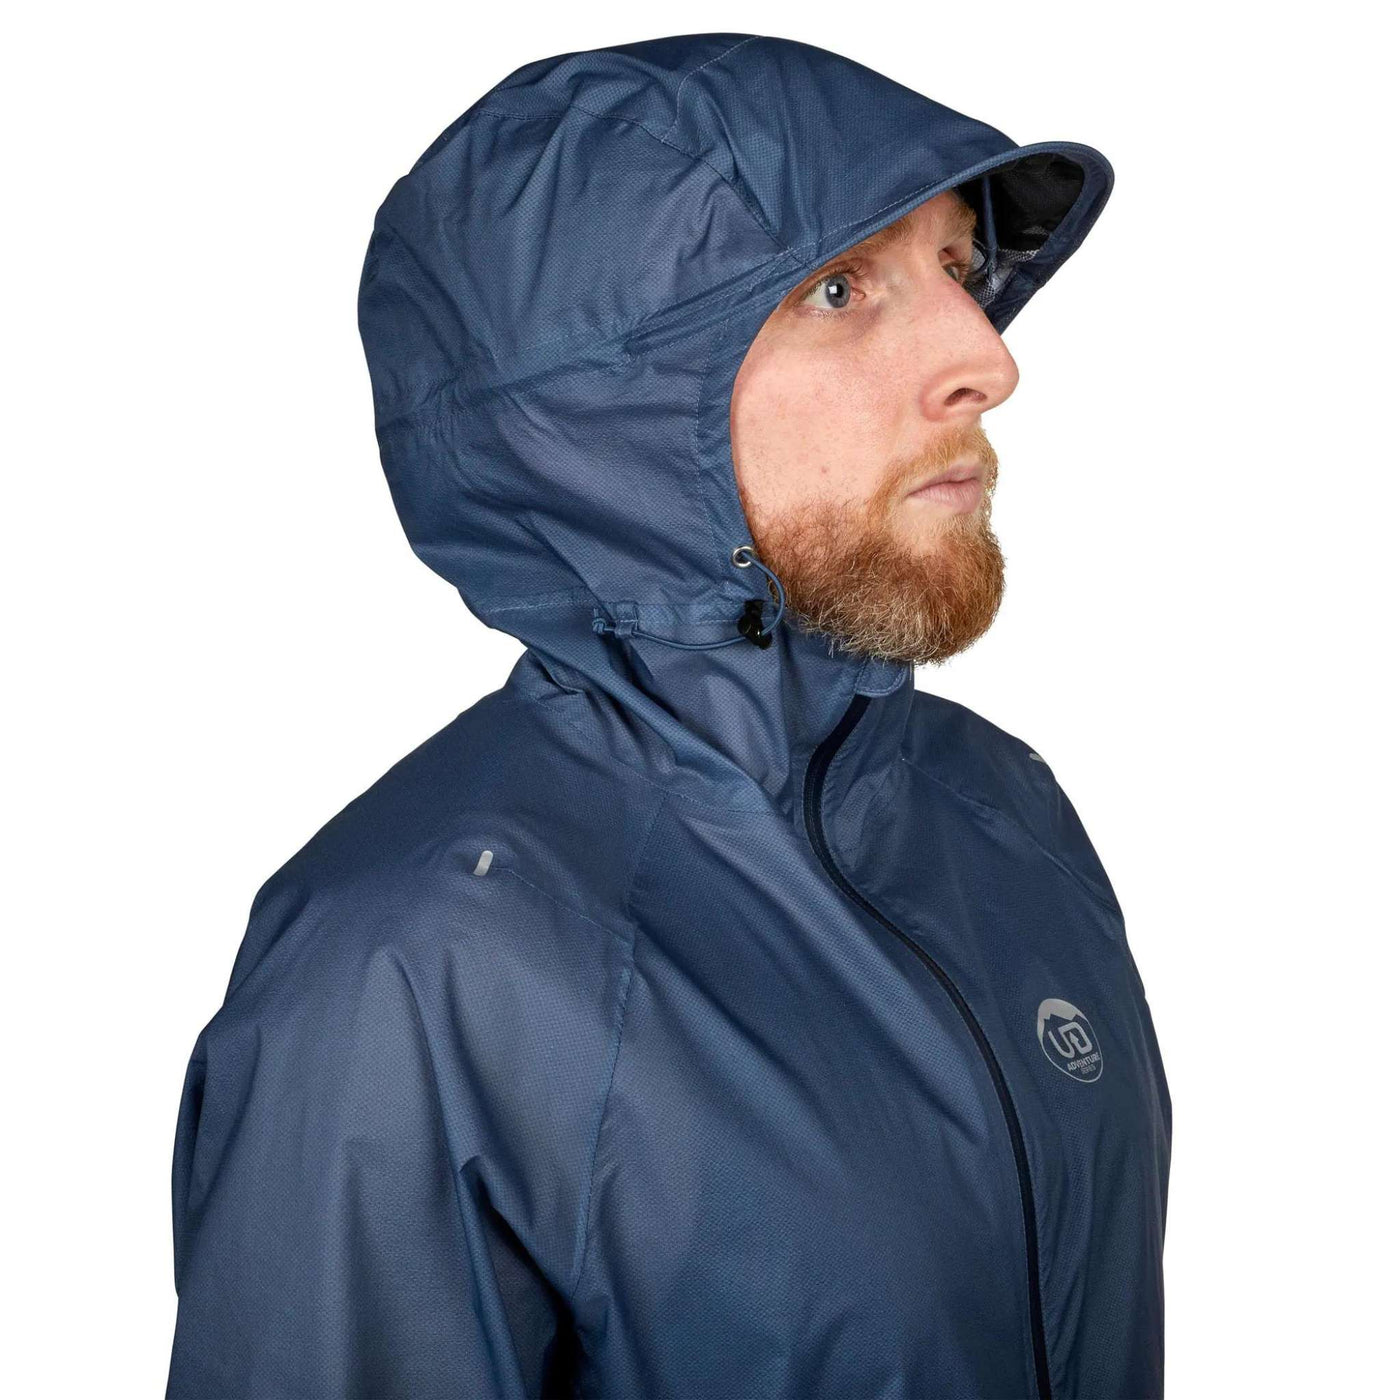 Ultimate Direction Ultra Jackets - Mens | Trail Running Jacket | Further Faster Christchurch NZ | #navy-blue